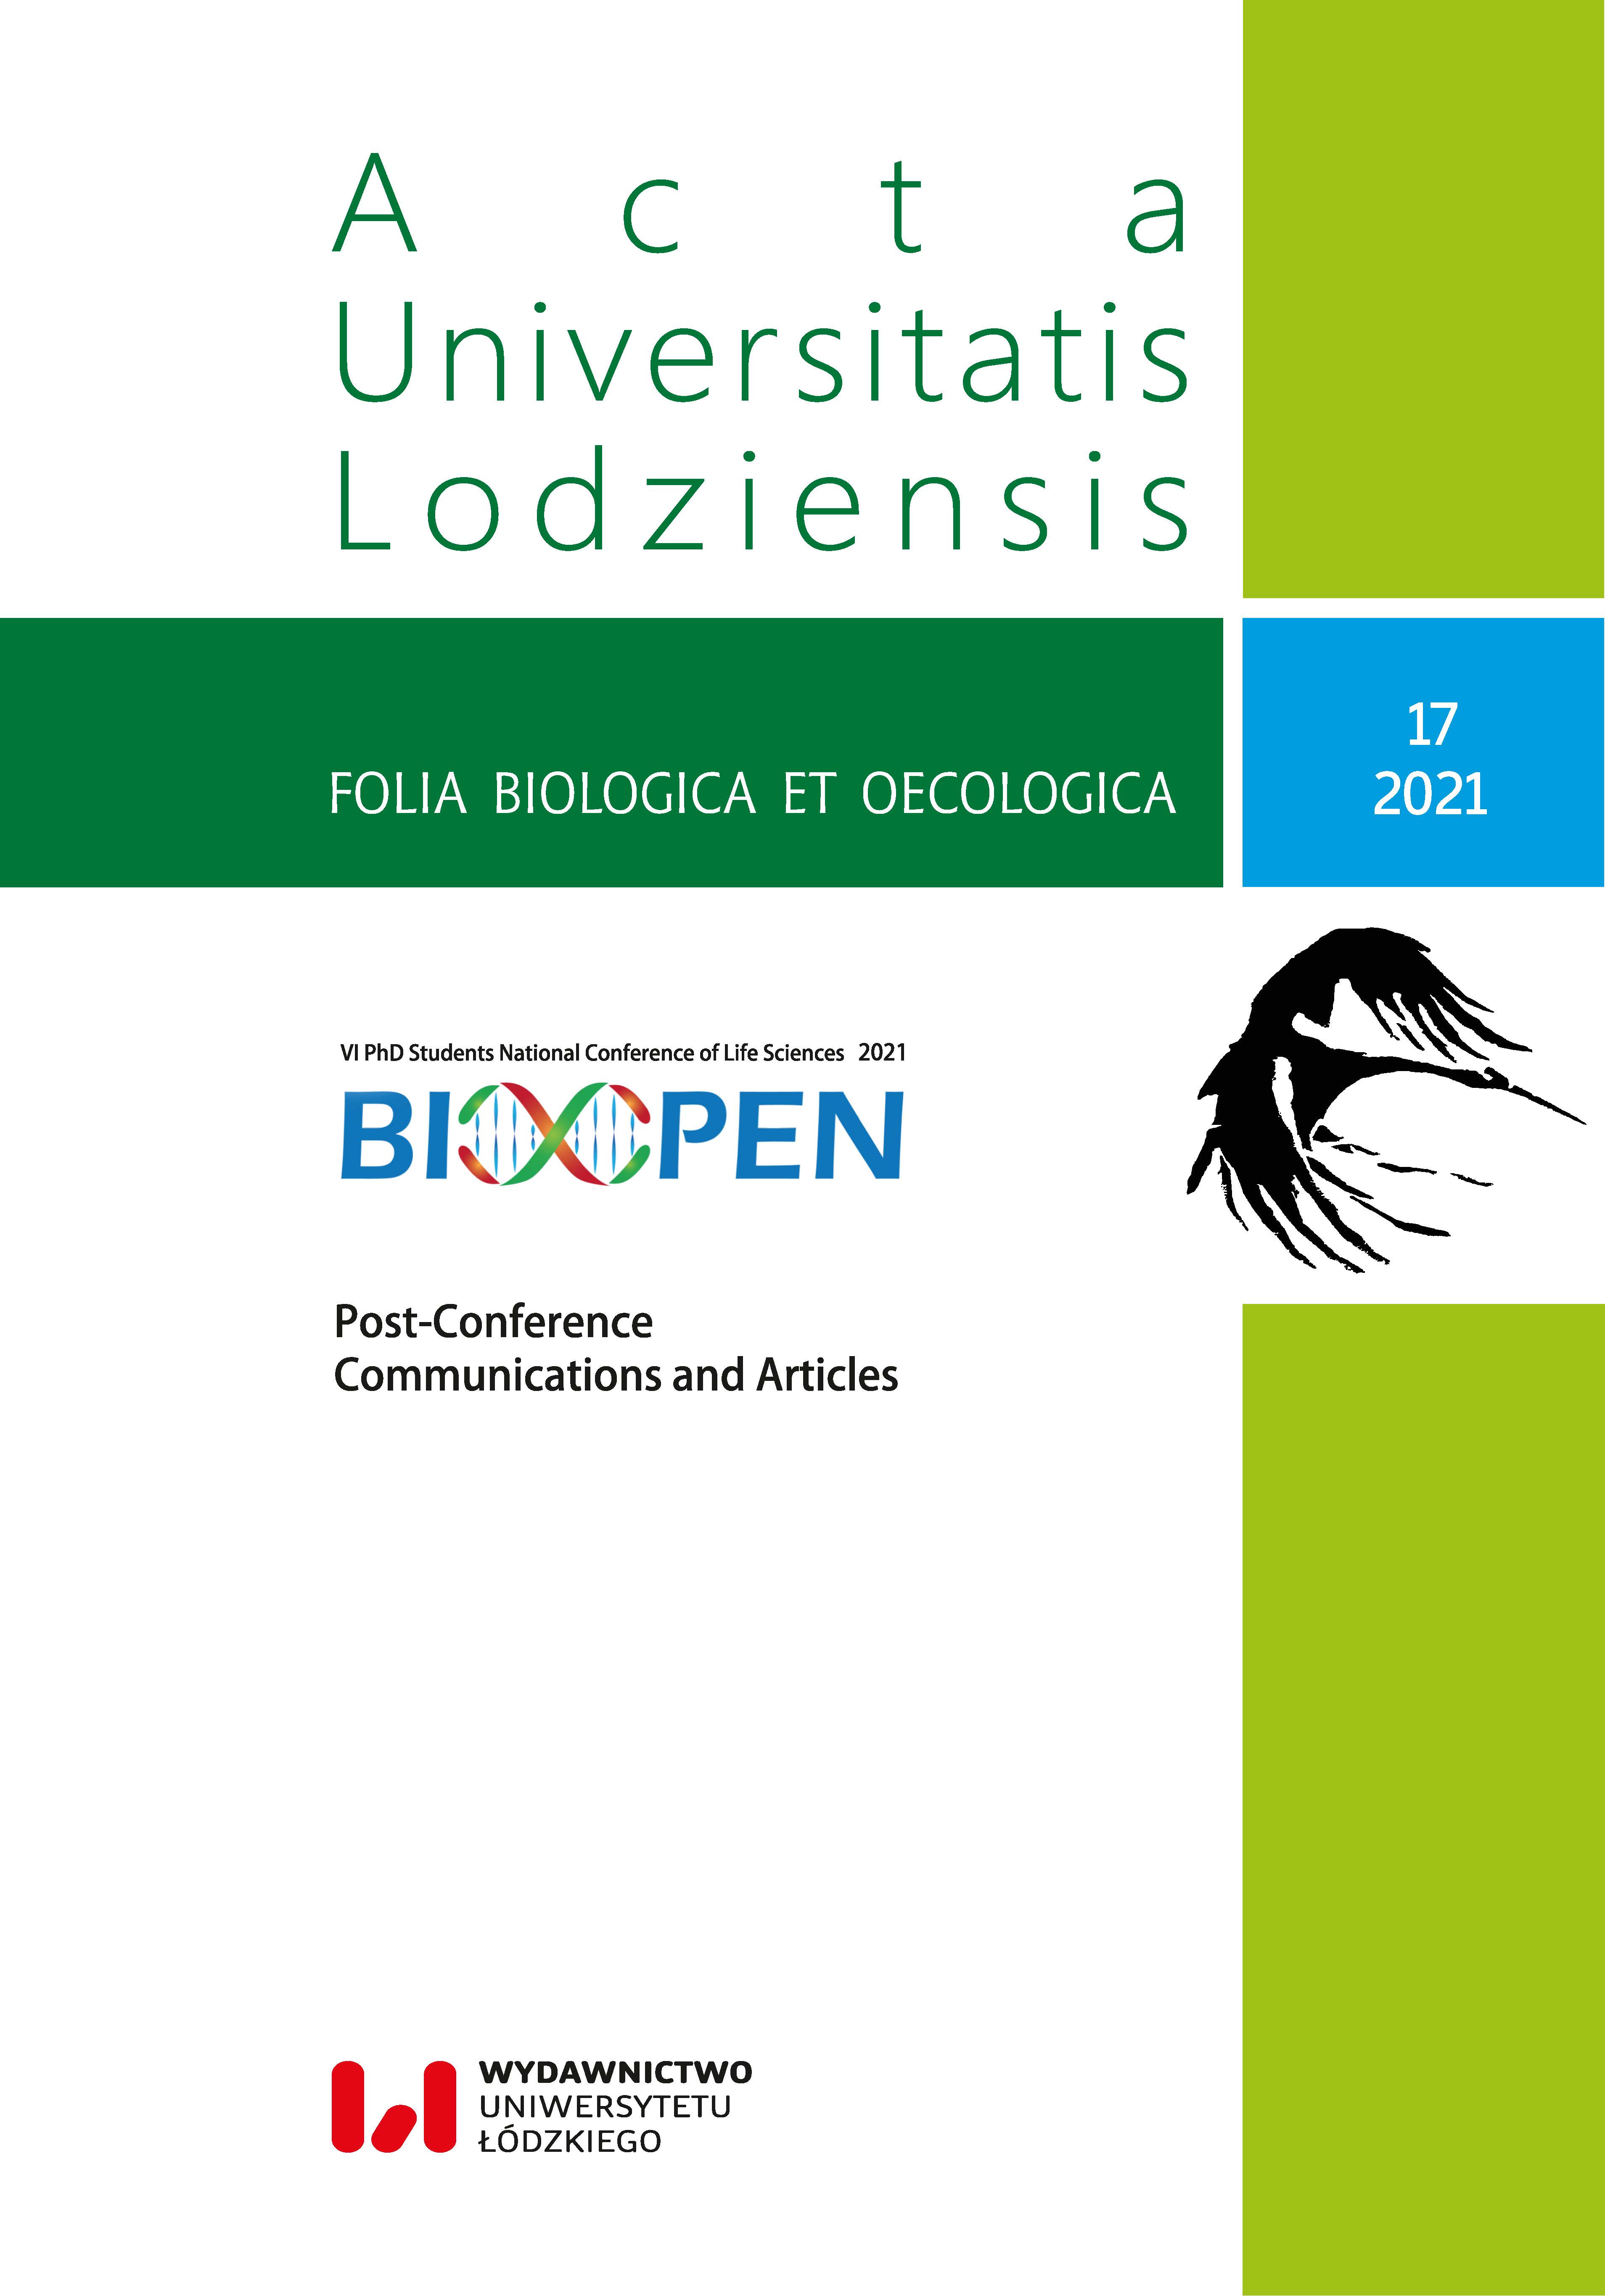 					View Vol. 17 (2021): VI PhD Students National Conference of Life Sciences BIOOPEN 2021. Post-Conference Communications and Articles
				